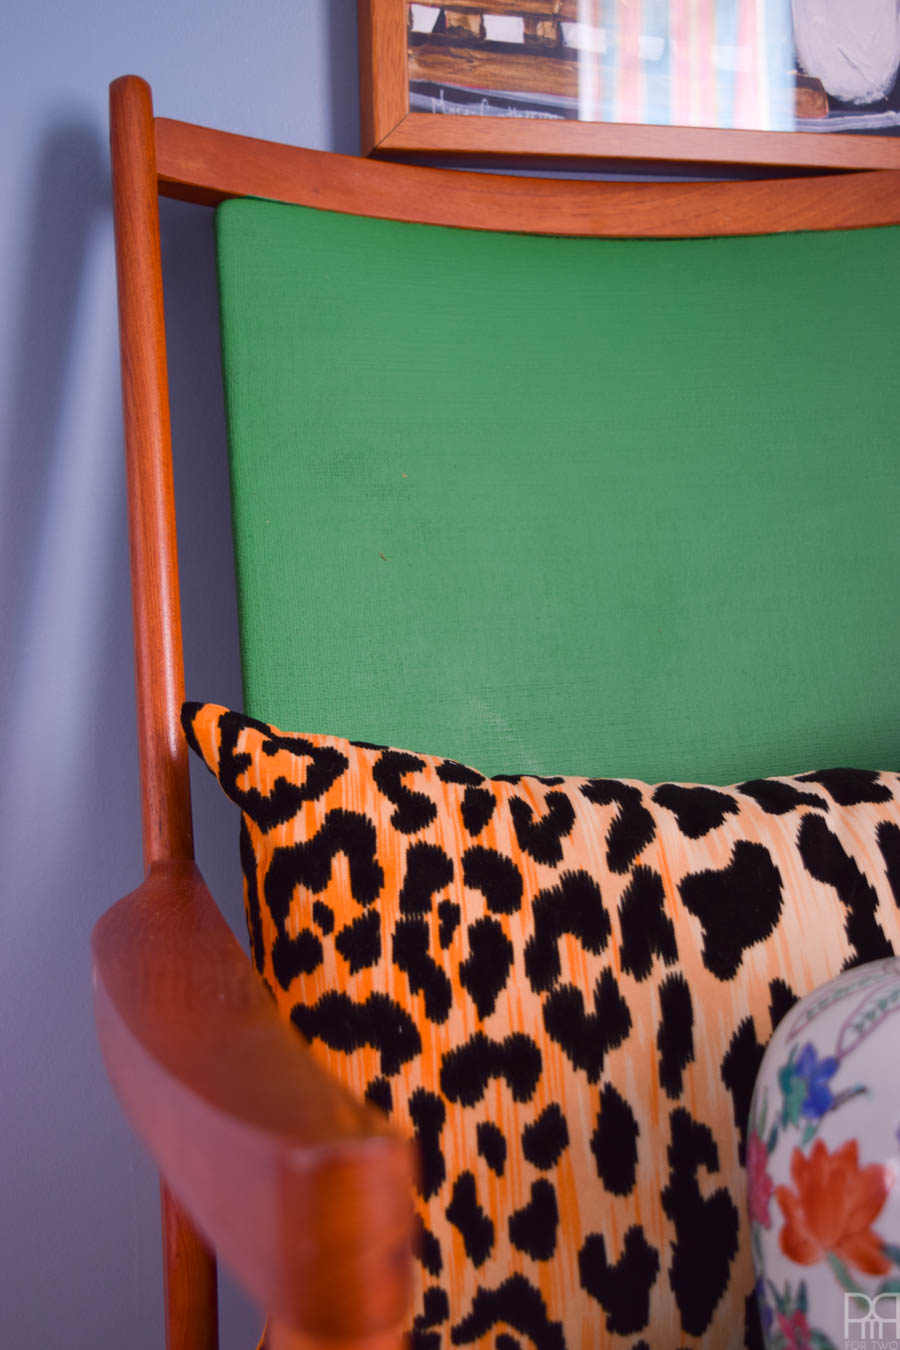 how to paint an upholstered chair using BEHR paint